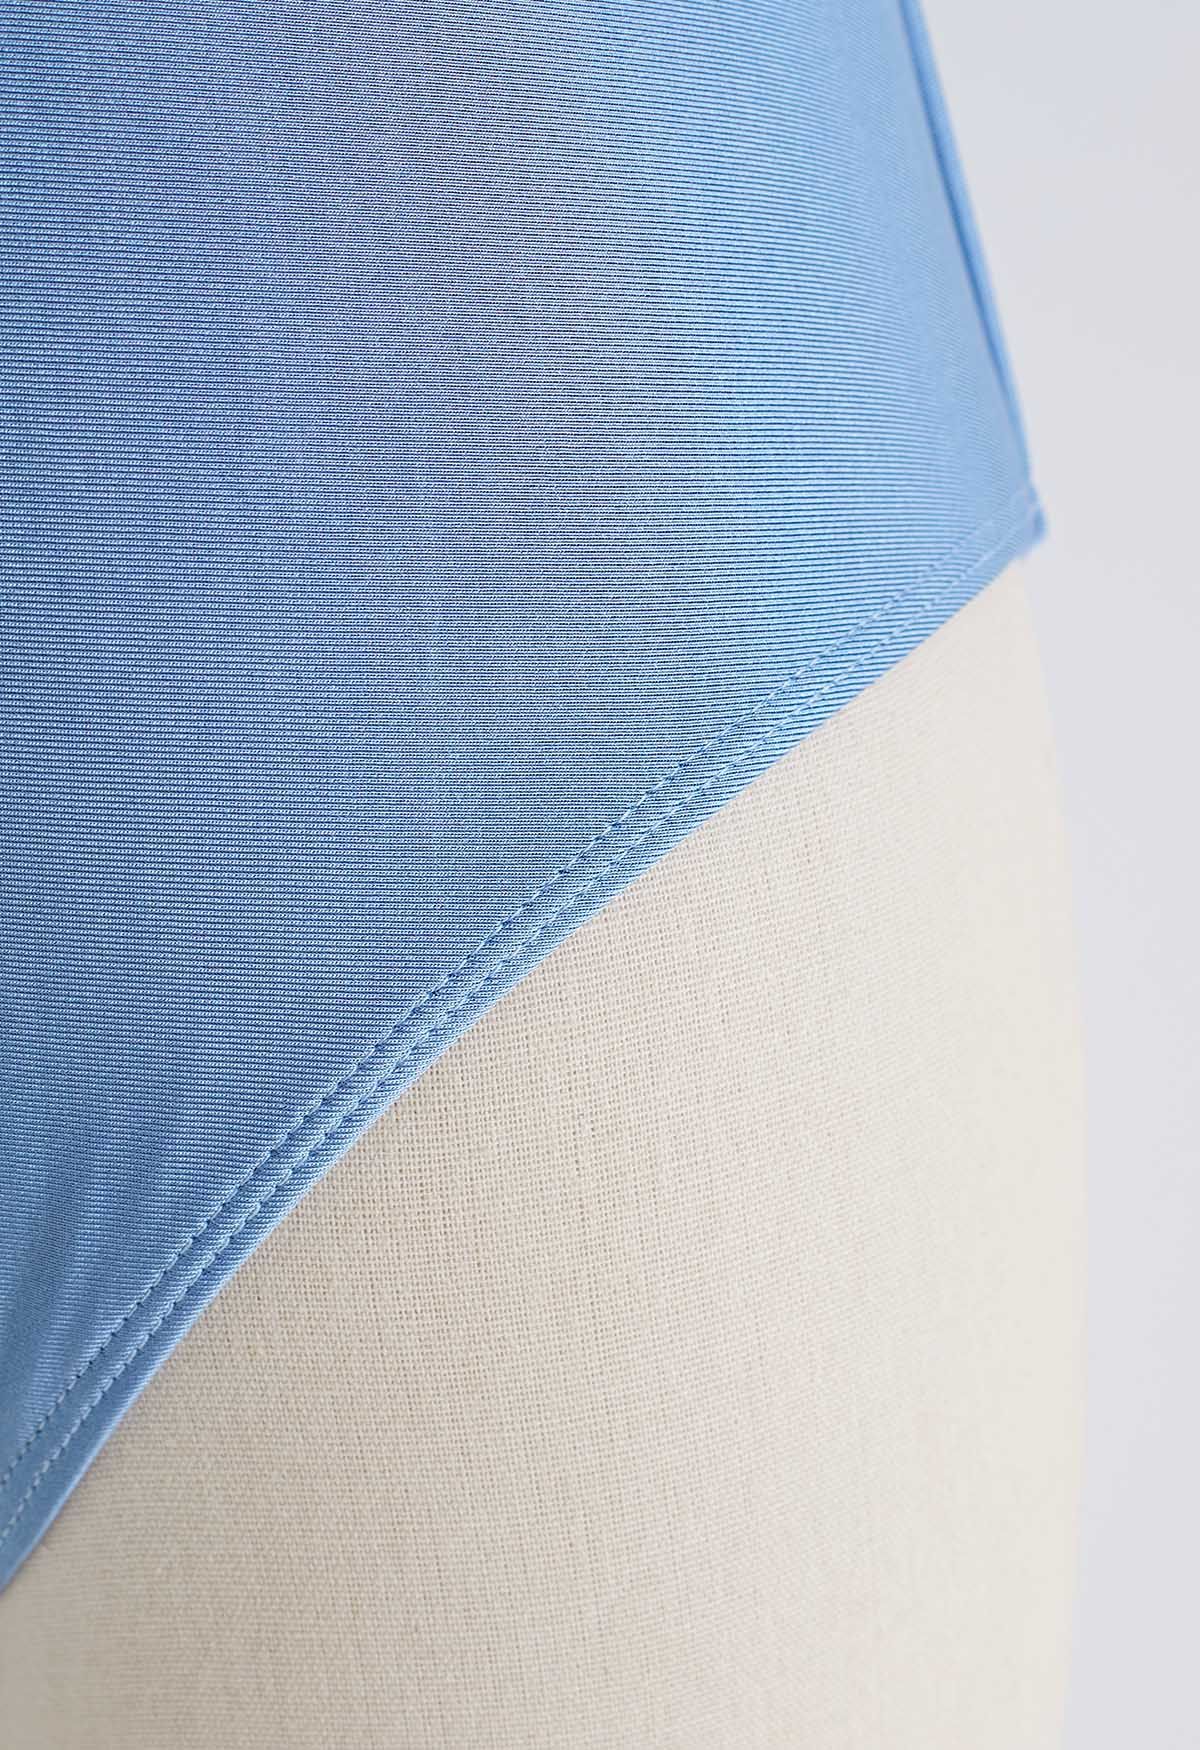 Shirred Detail Glossy Blue Swimsuit